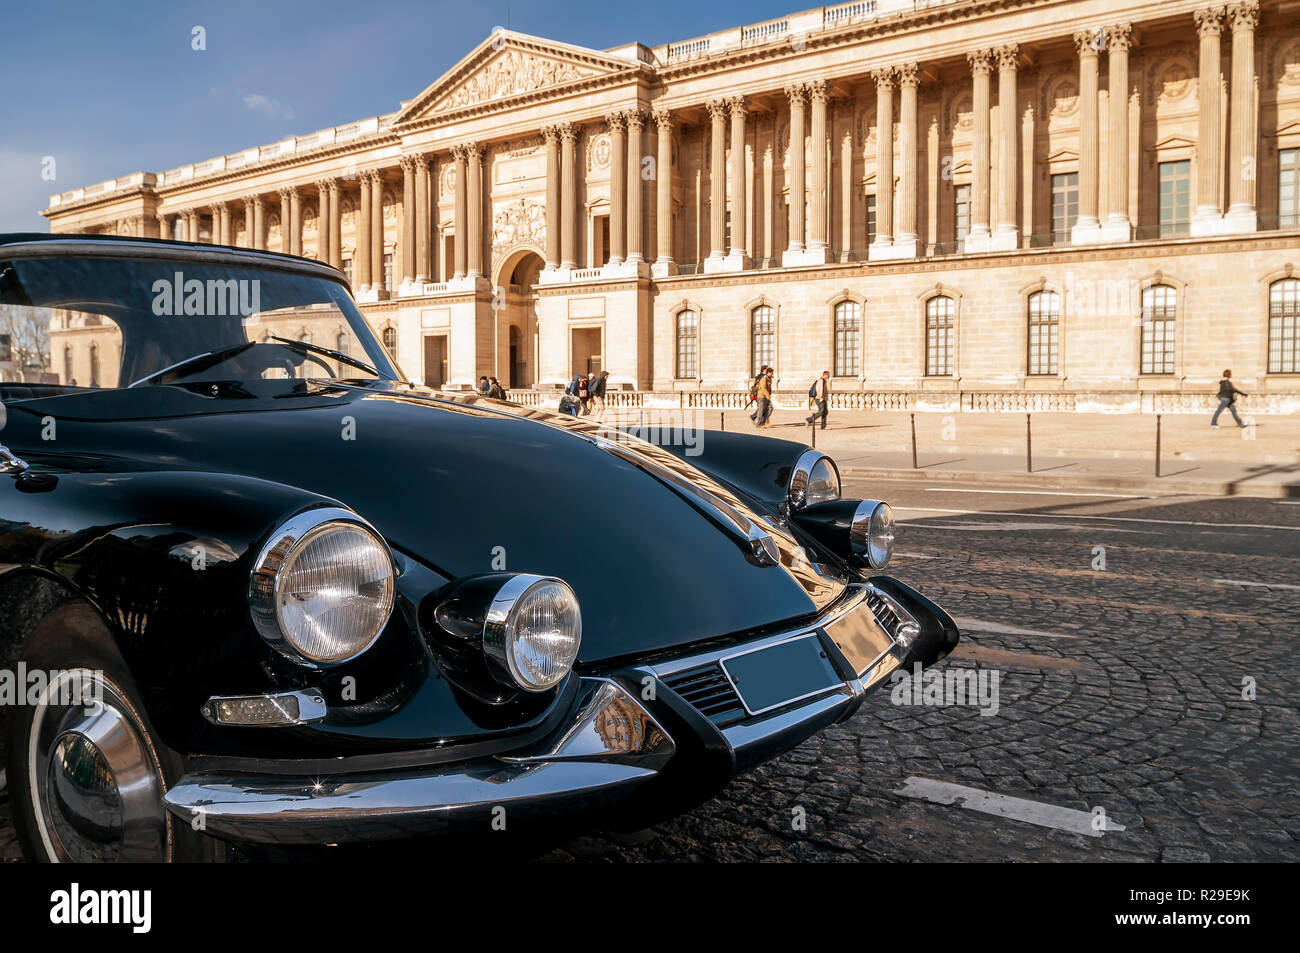 Beautiful black vintage car parked in front of the Louvre Museum, Paris, France Stock Photo